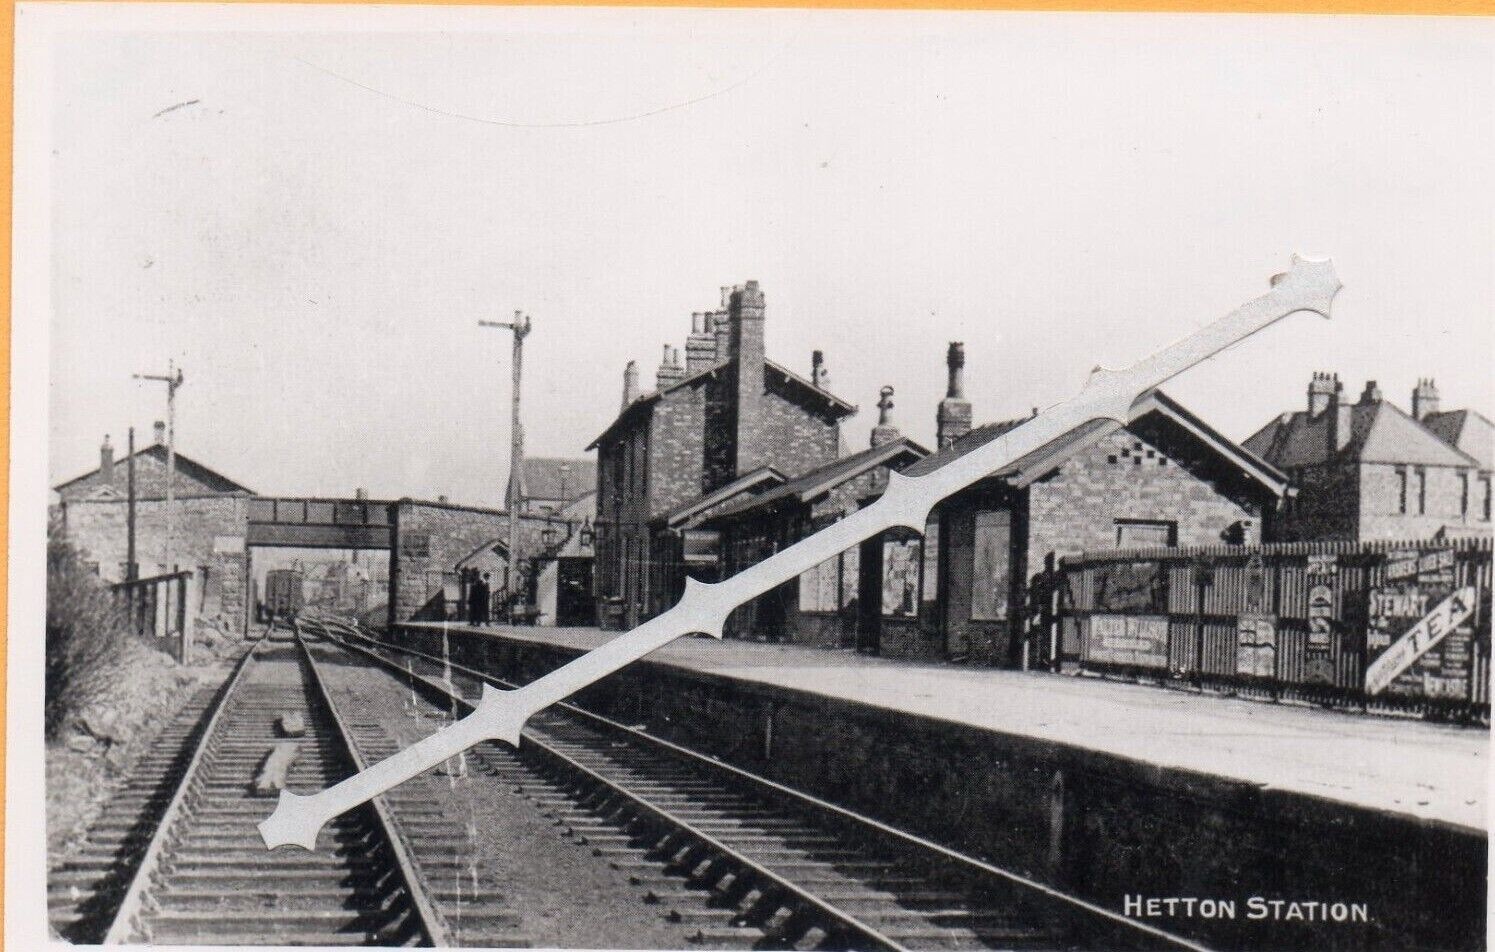 House Clearance - Hetton Station (NER) Durham REAL PHOTO (not PC)